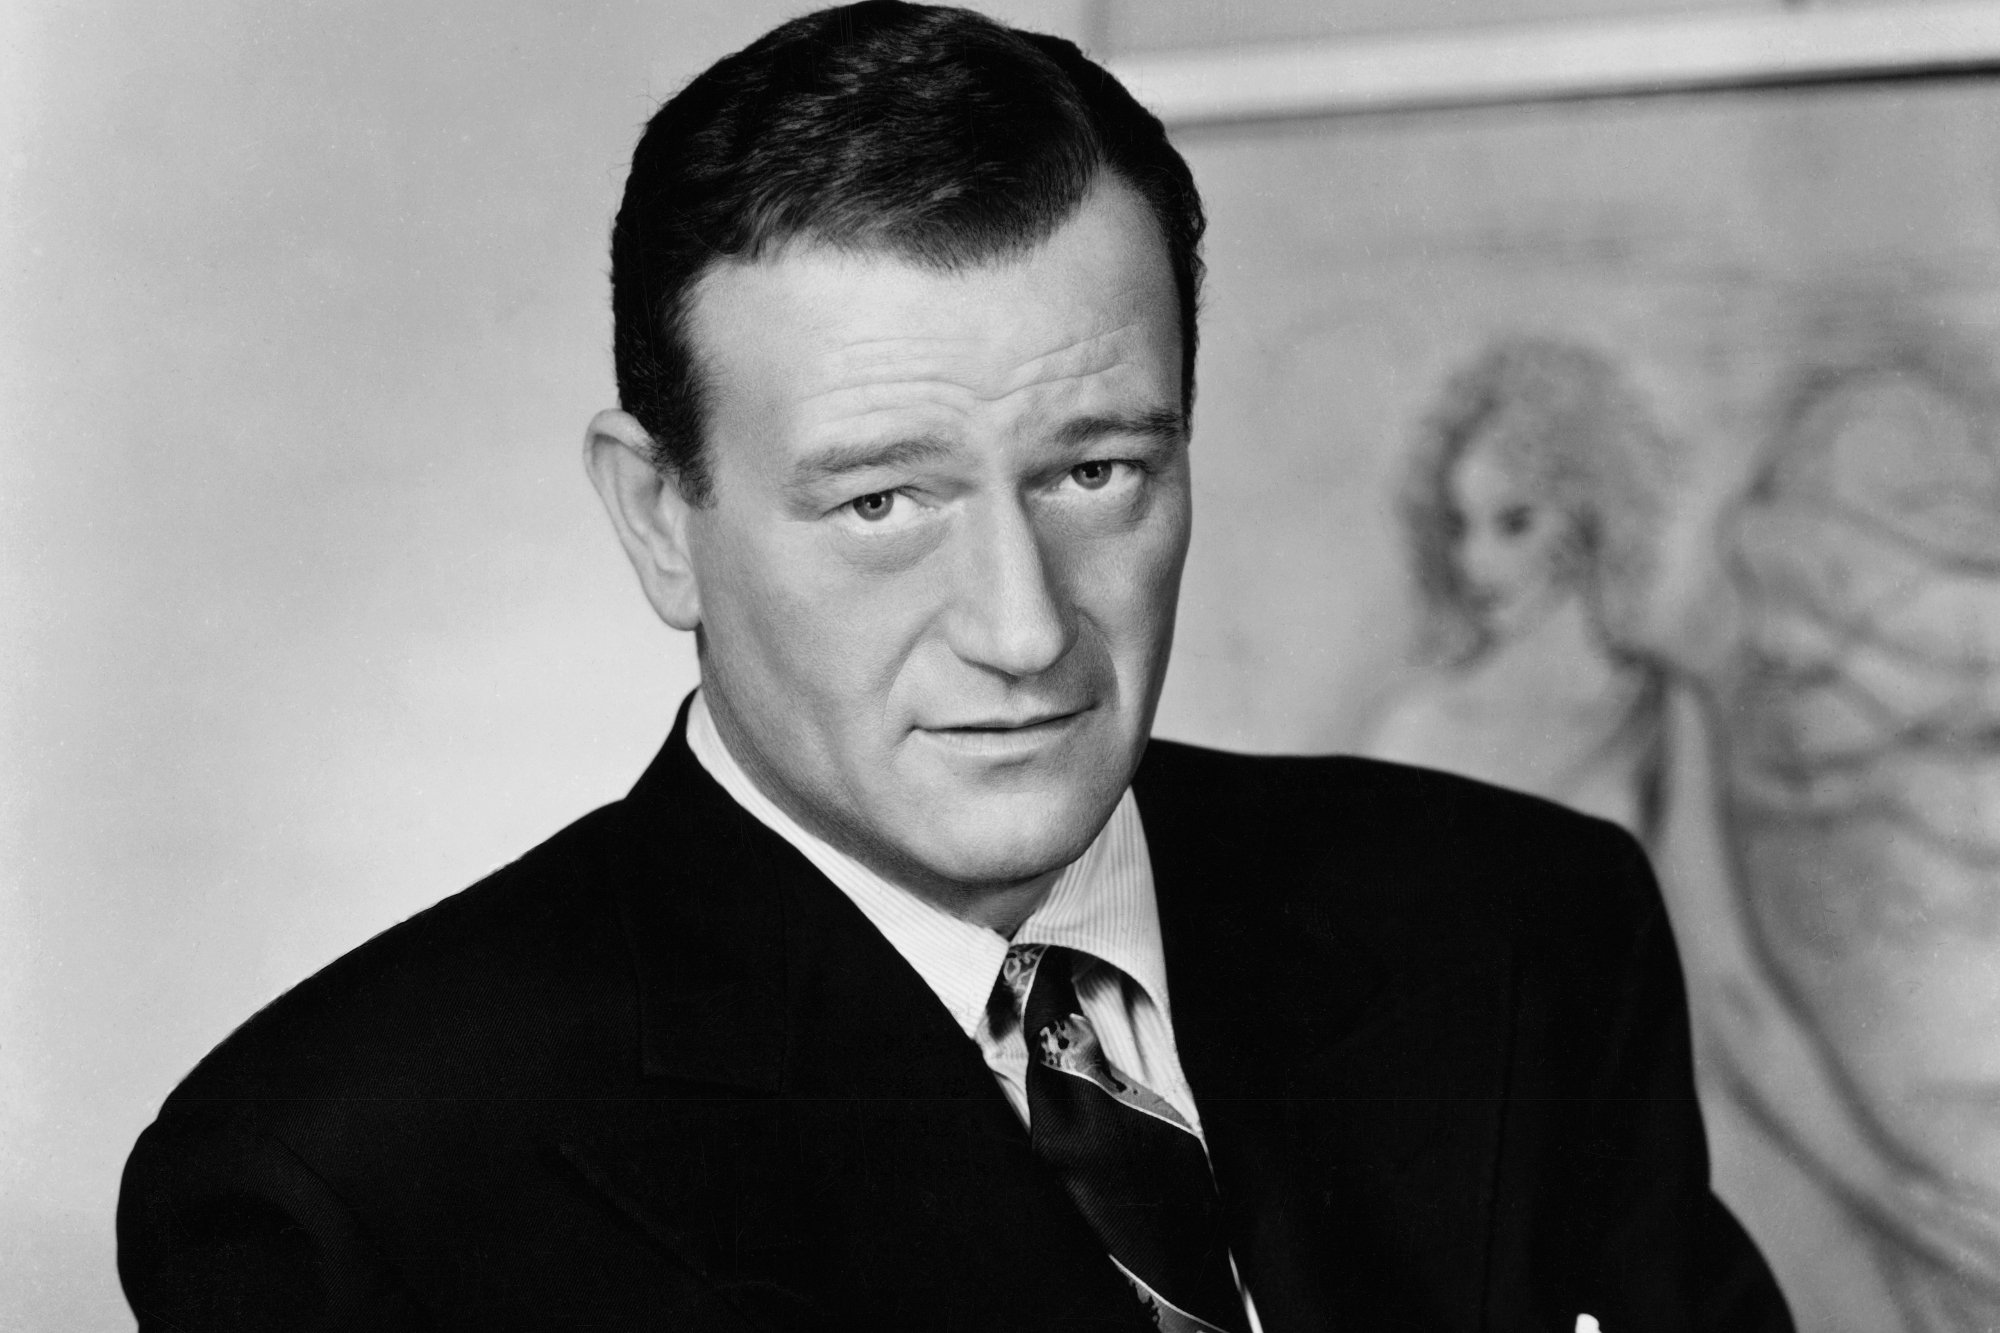 'The Barbarian and the Geisha' star John Wayne wearing a suit and tie, looking directly into the camera in a black-and-white photograph